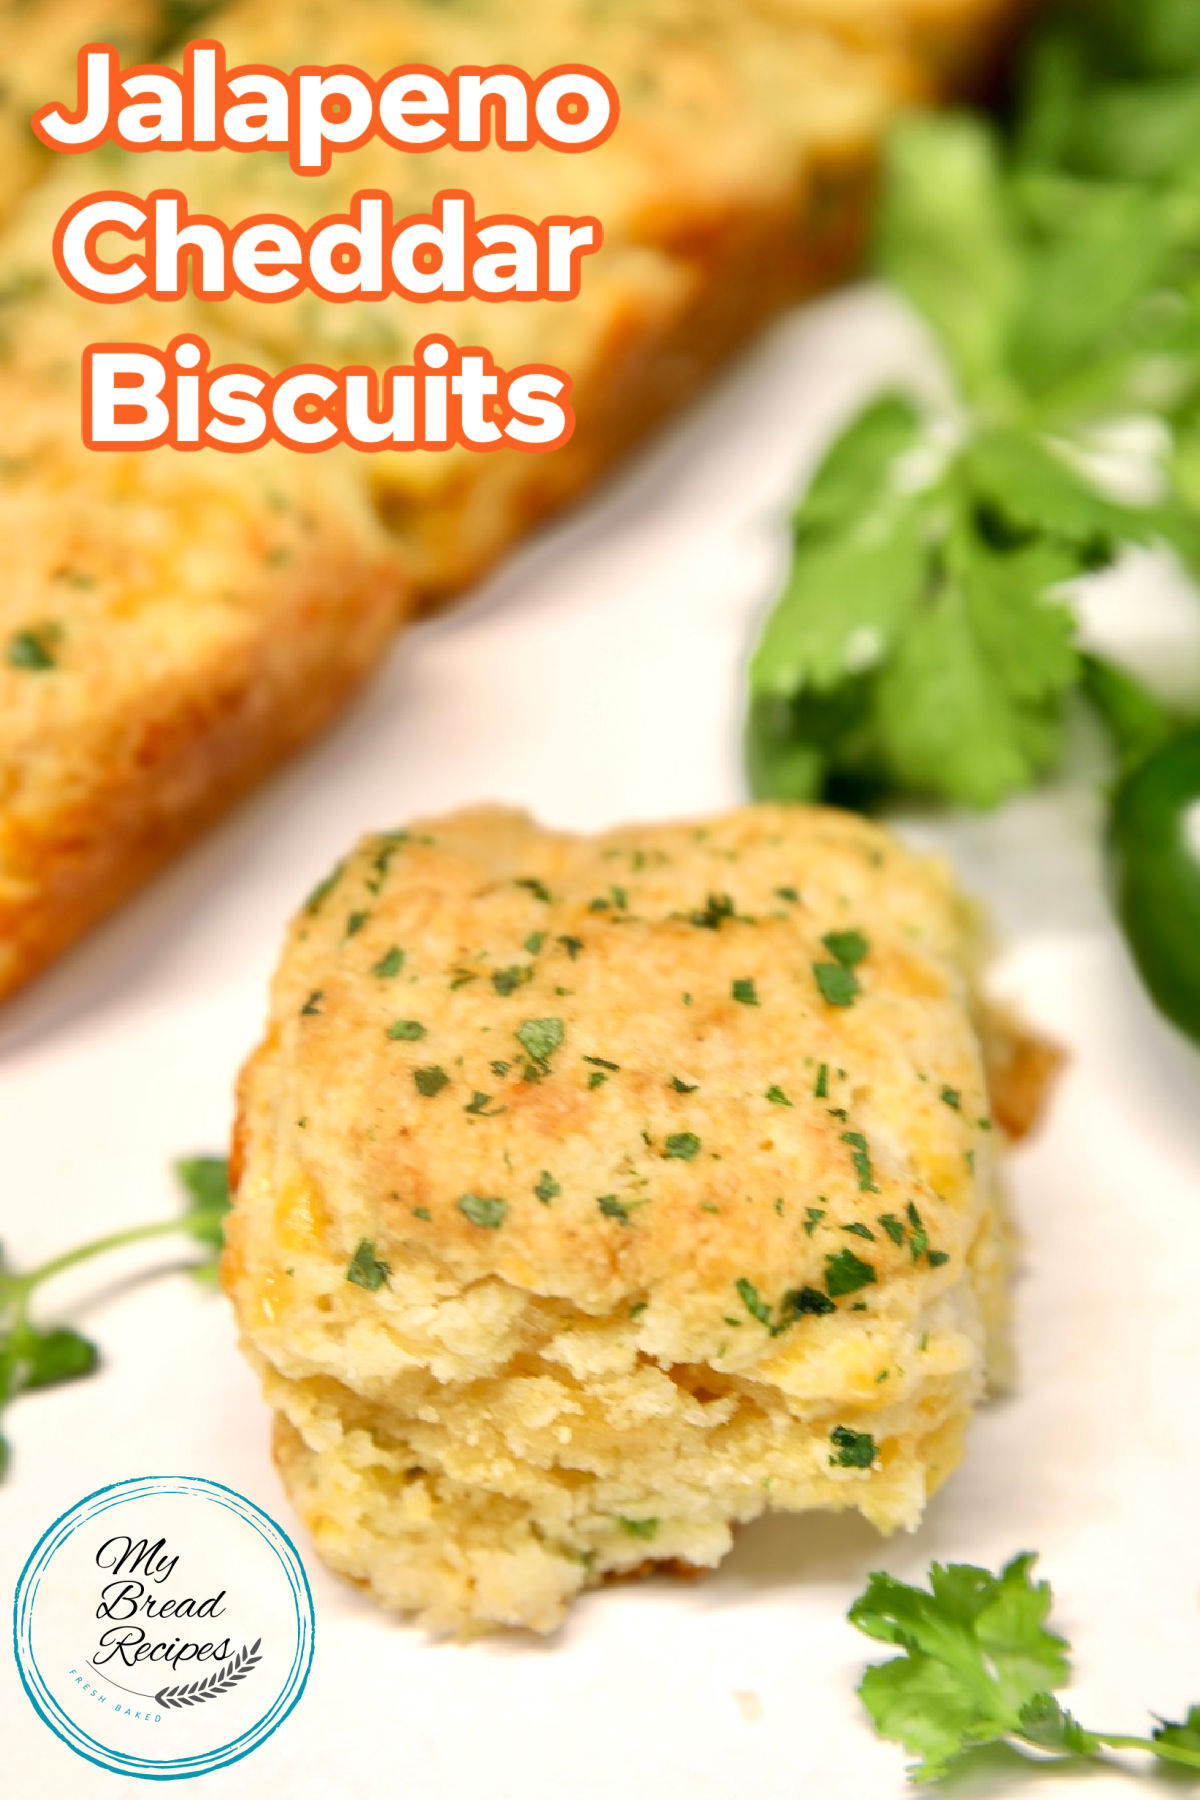 Jalapeno Cheddar Biscuit with cilantro - text overlay.